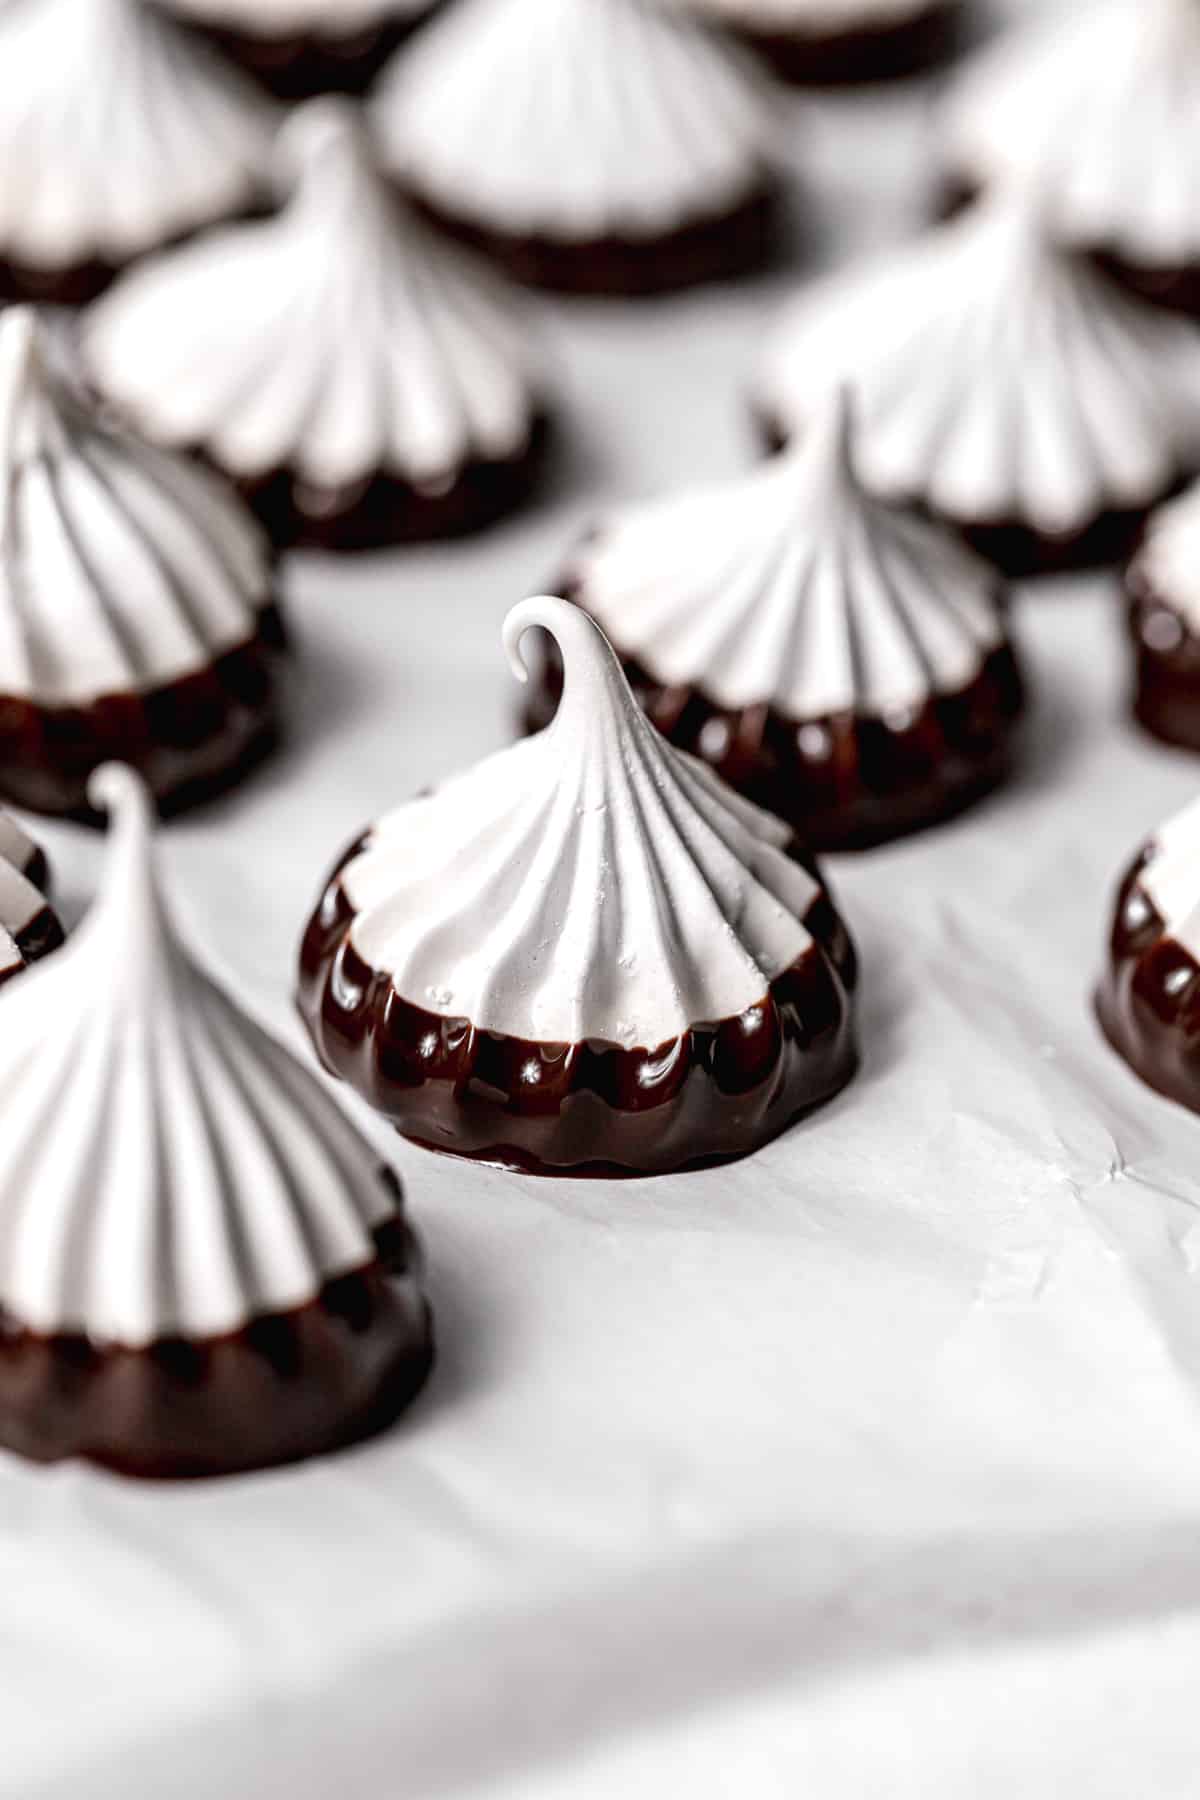 meringue cookies dipped in chocolate on parchment paper.